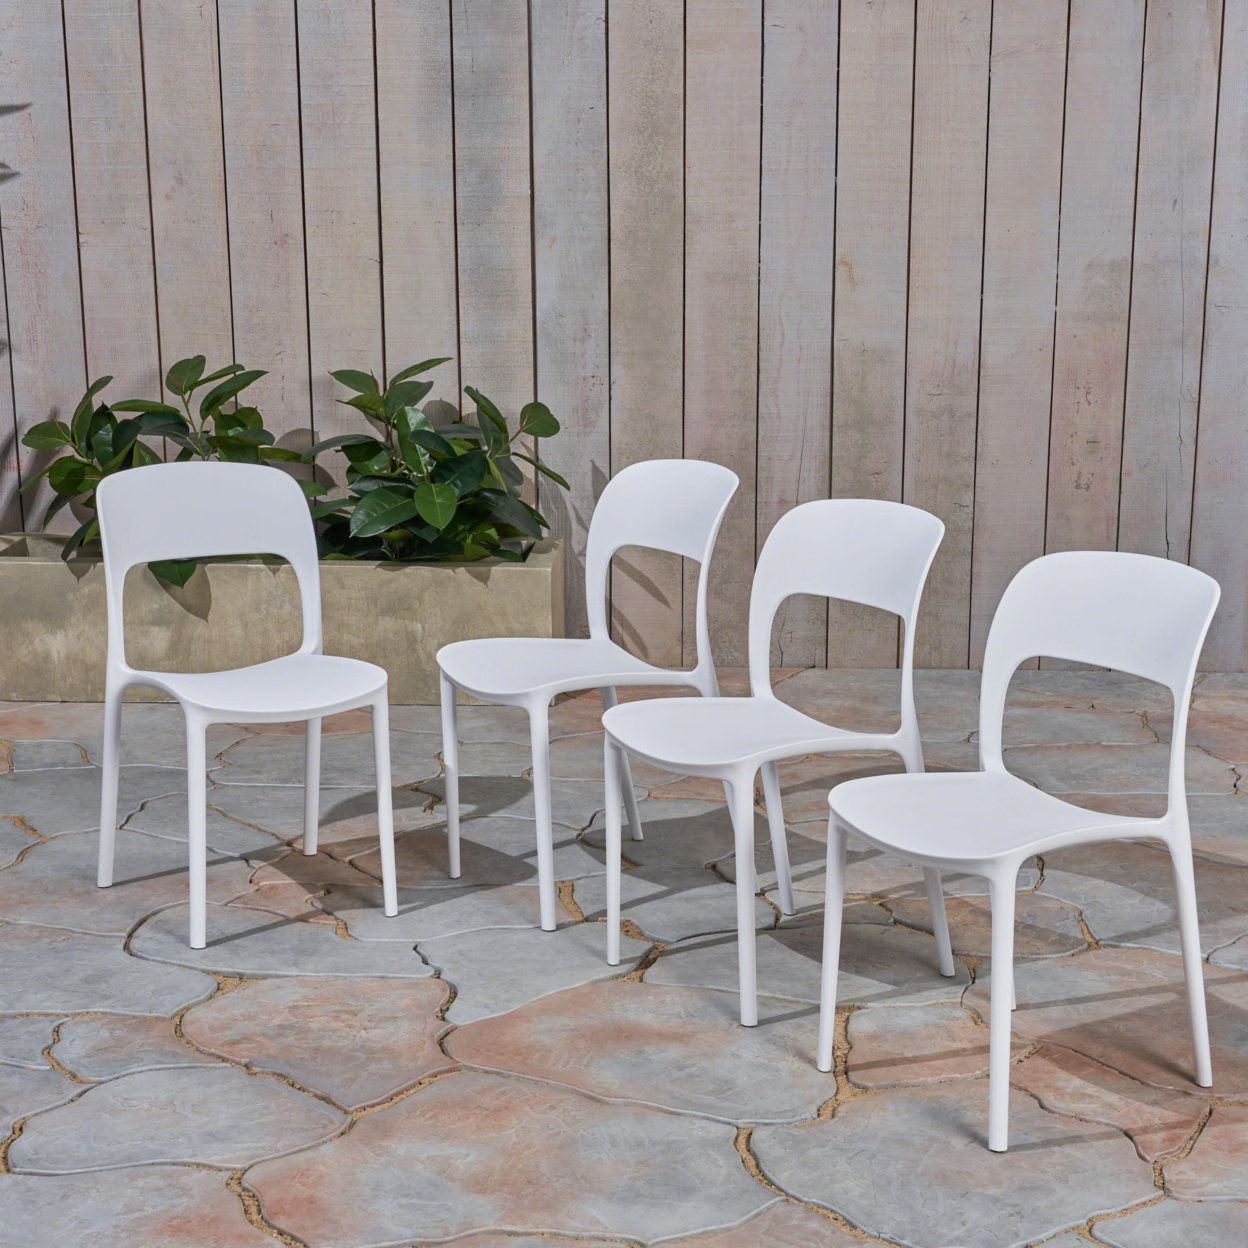 Dean Outdoor Plastic Chairs (Set Of 2) - White, Set Of 4